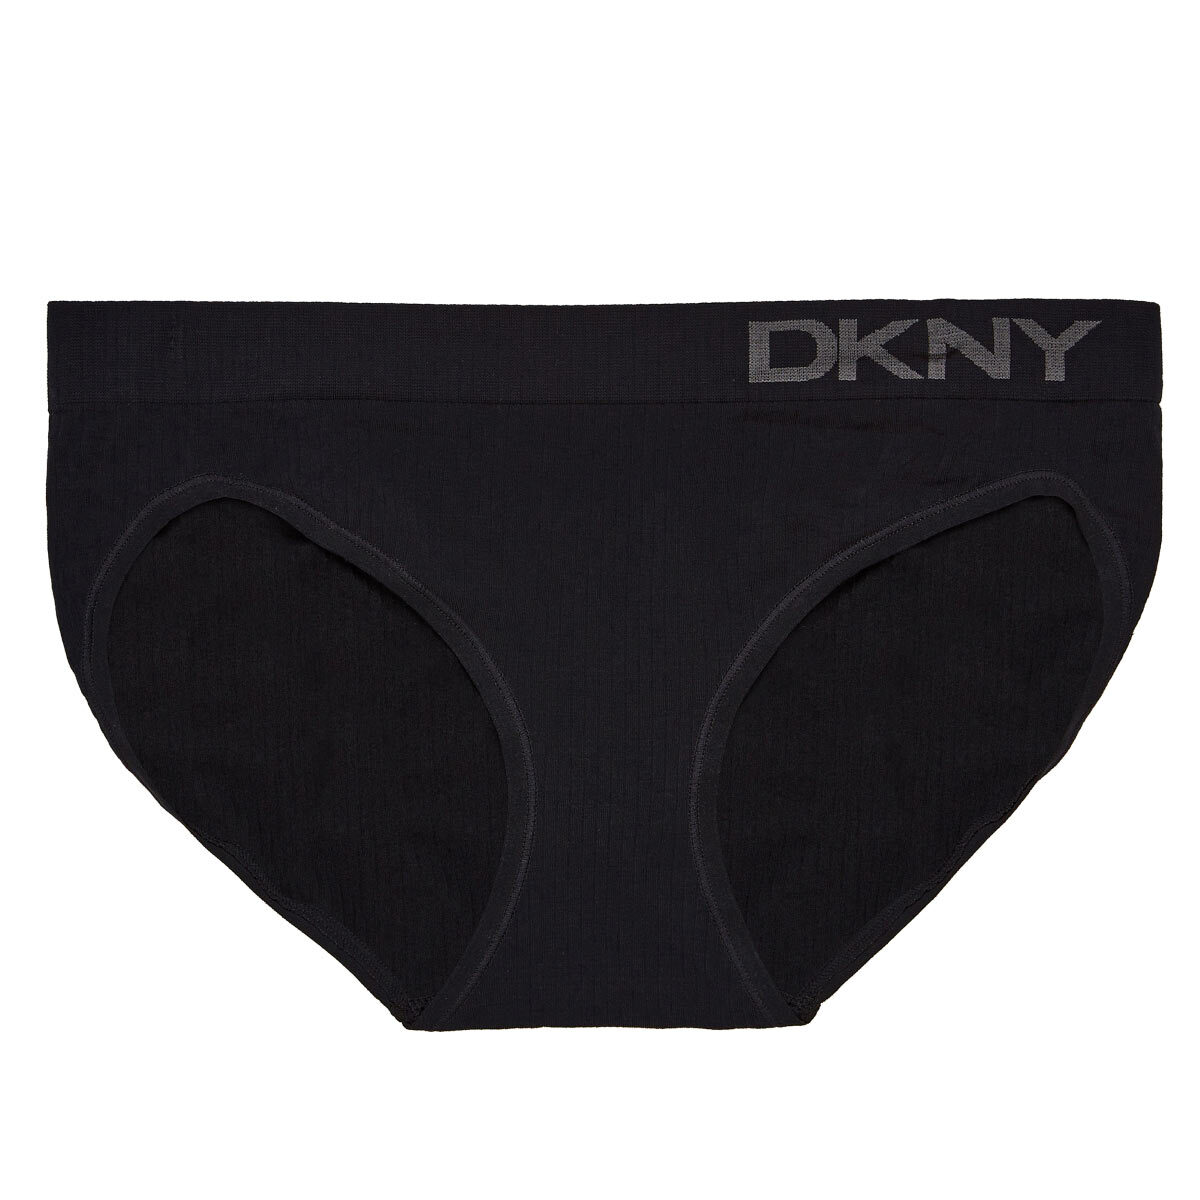 DKNY COTTON HIPSTER 5PK + LADIES SIZES M - XL at Costco